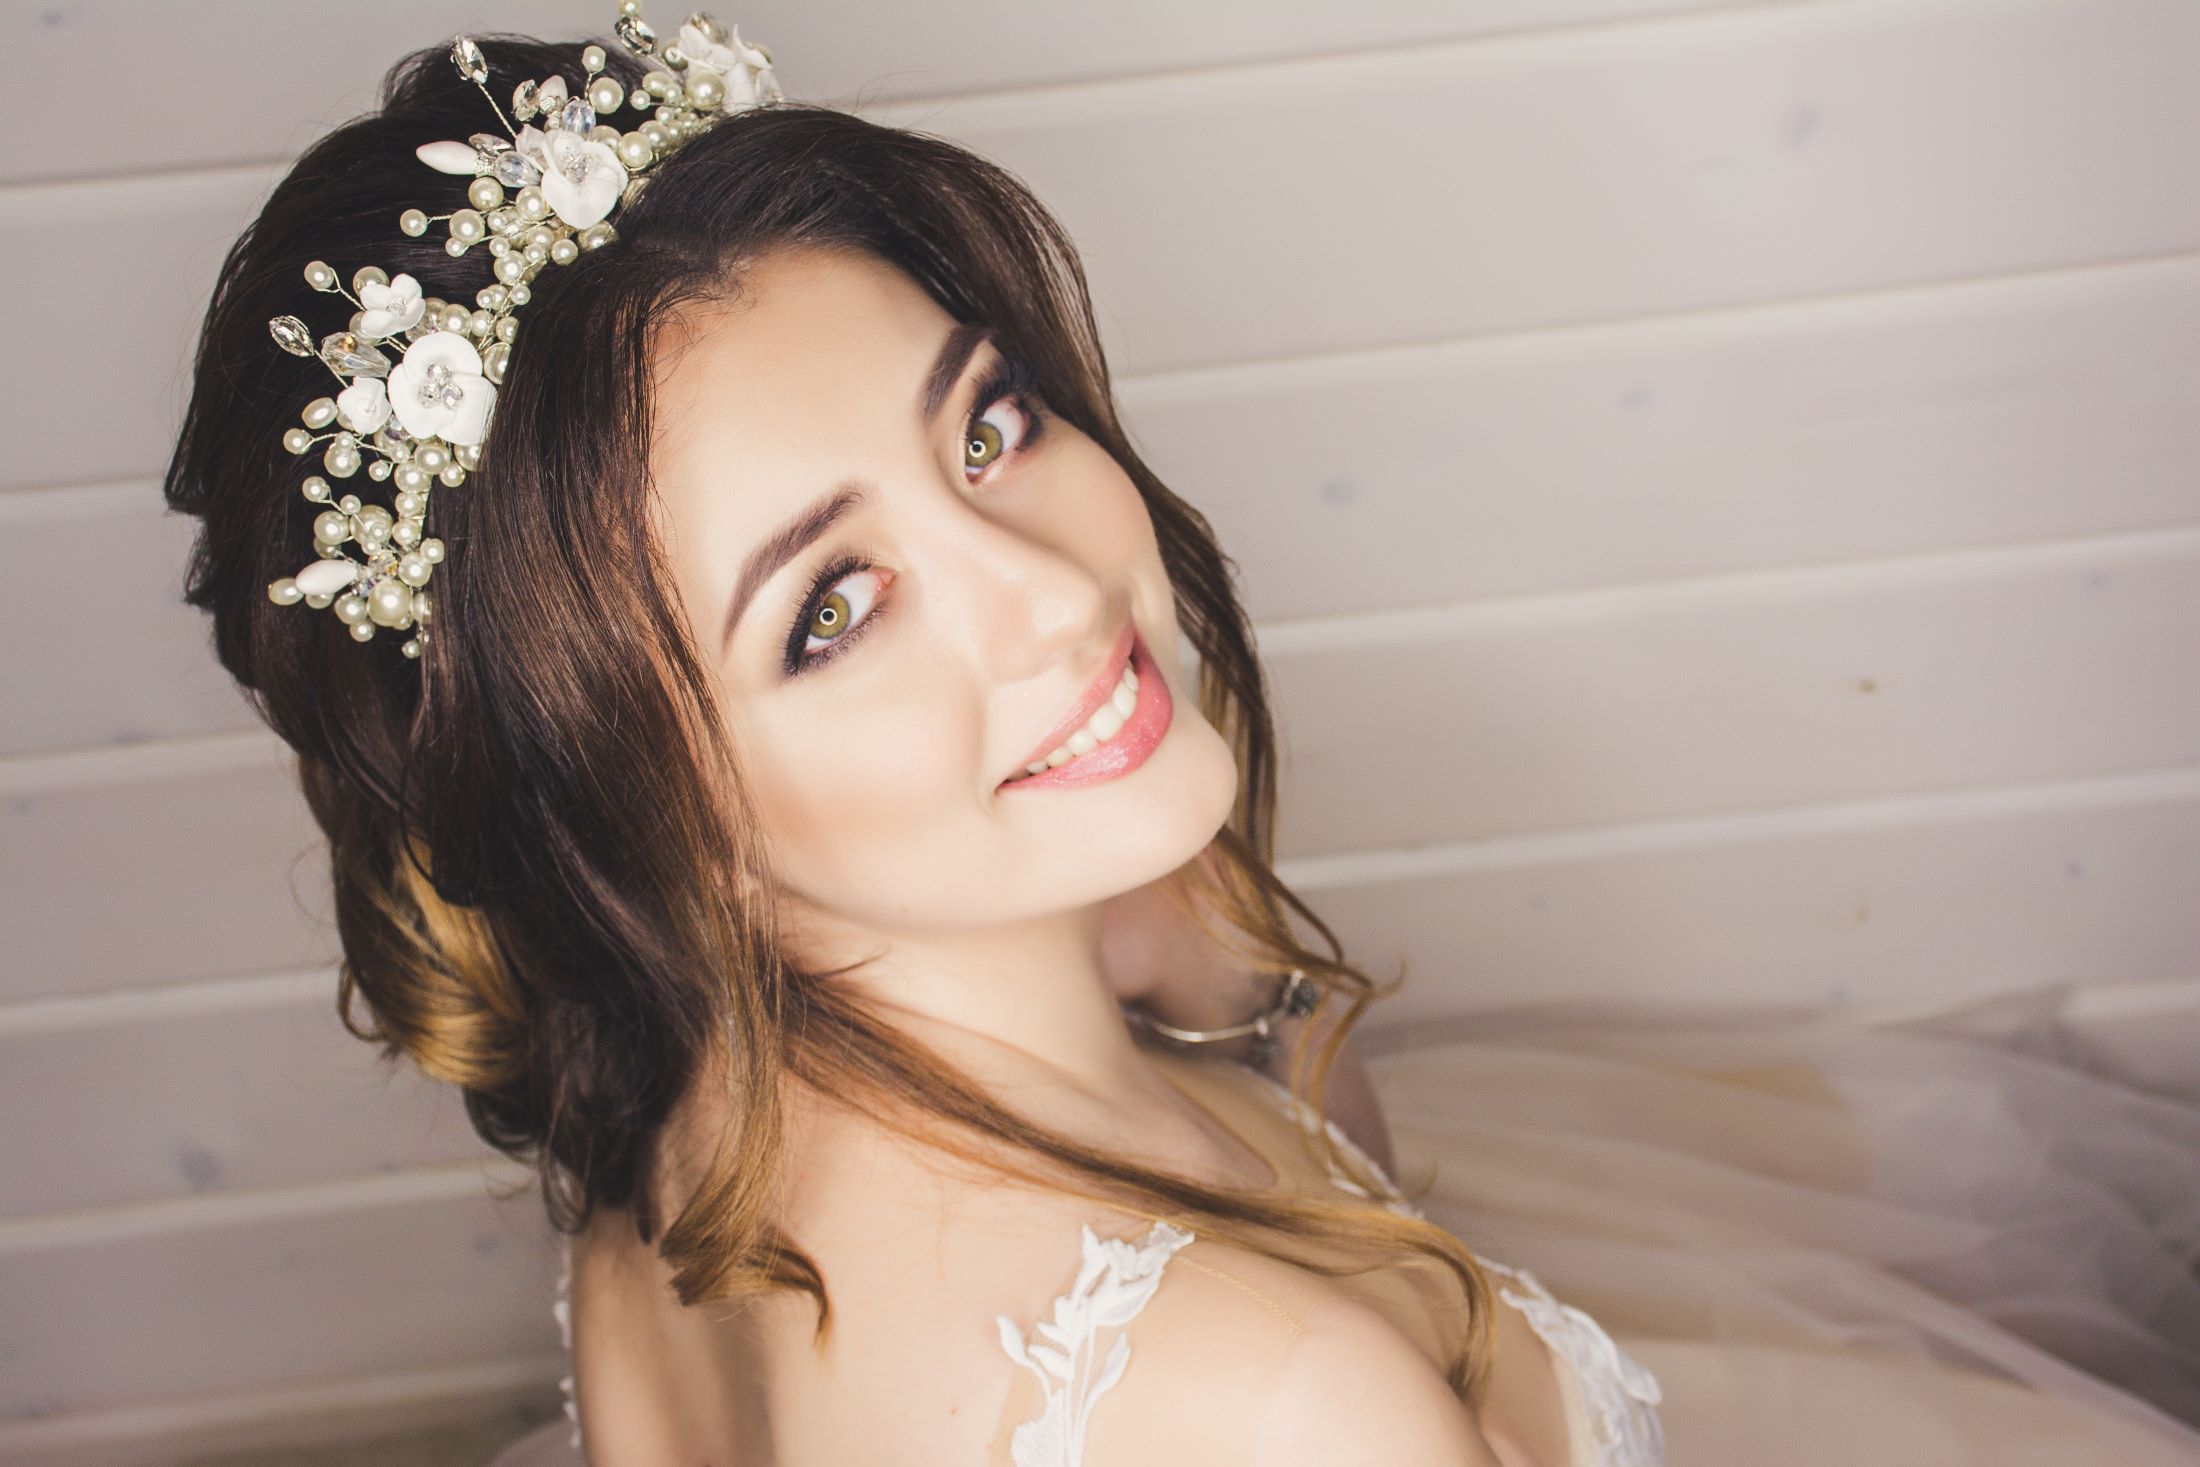 An image of a bride in neutral wedding day glam makeup.